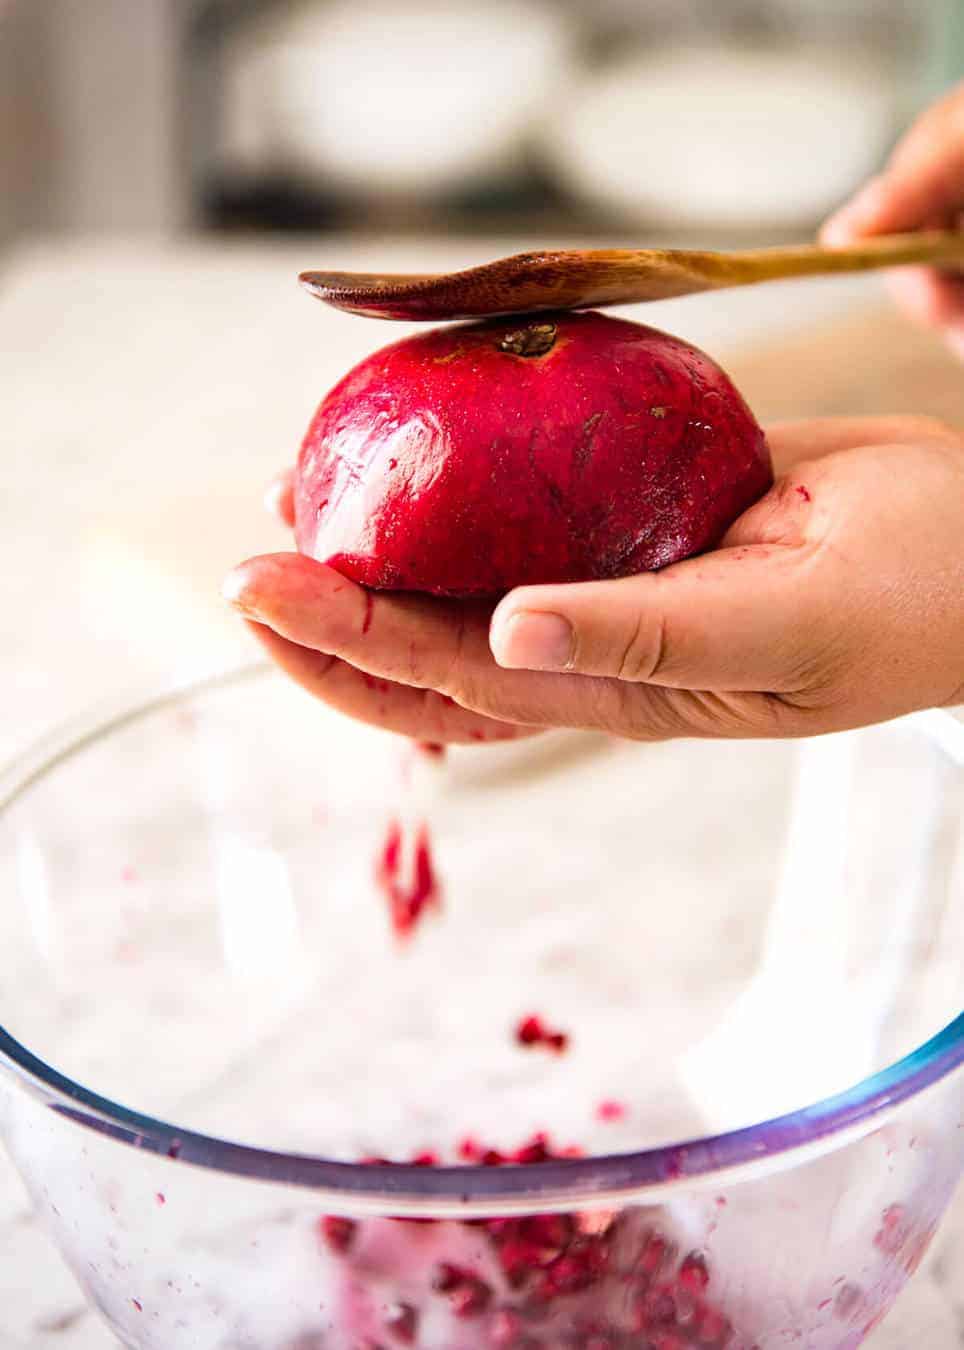 How to get seeds out of pomegranates